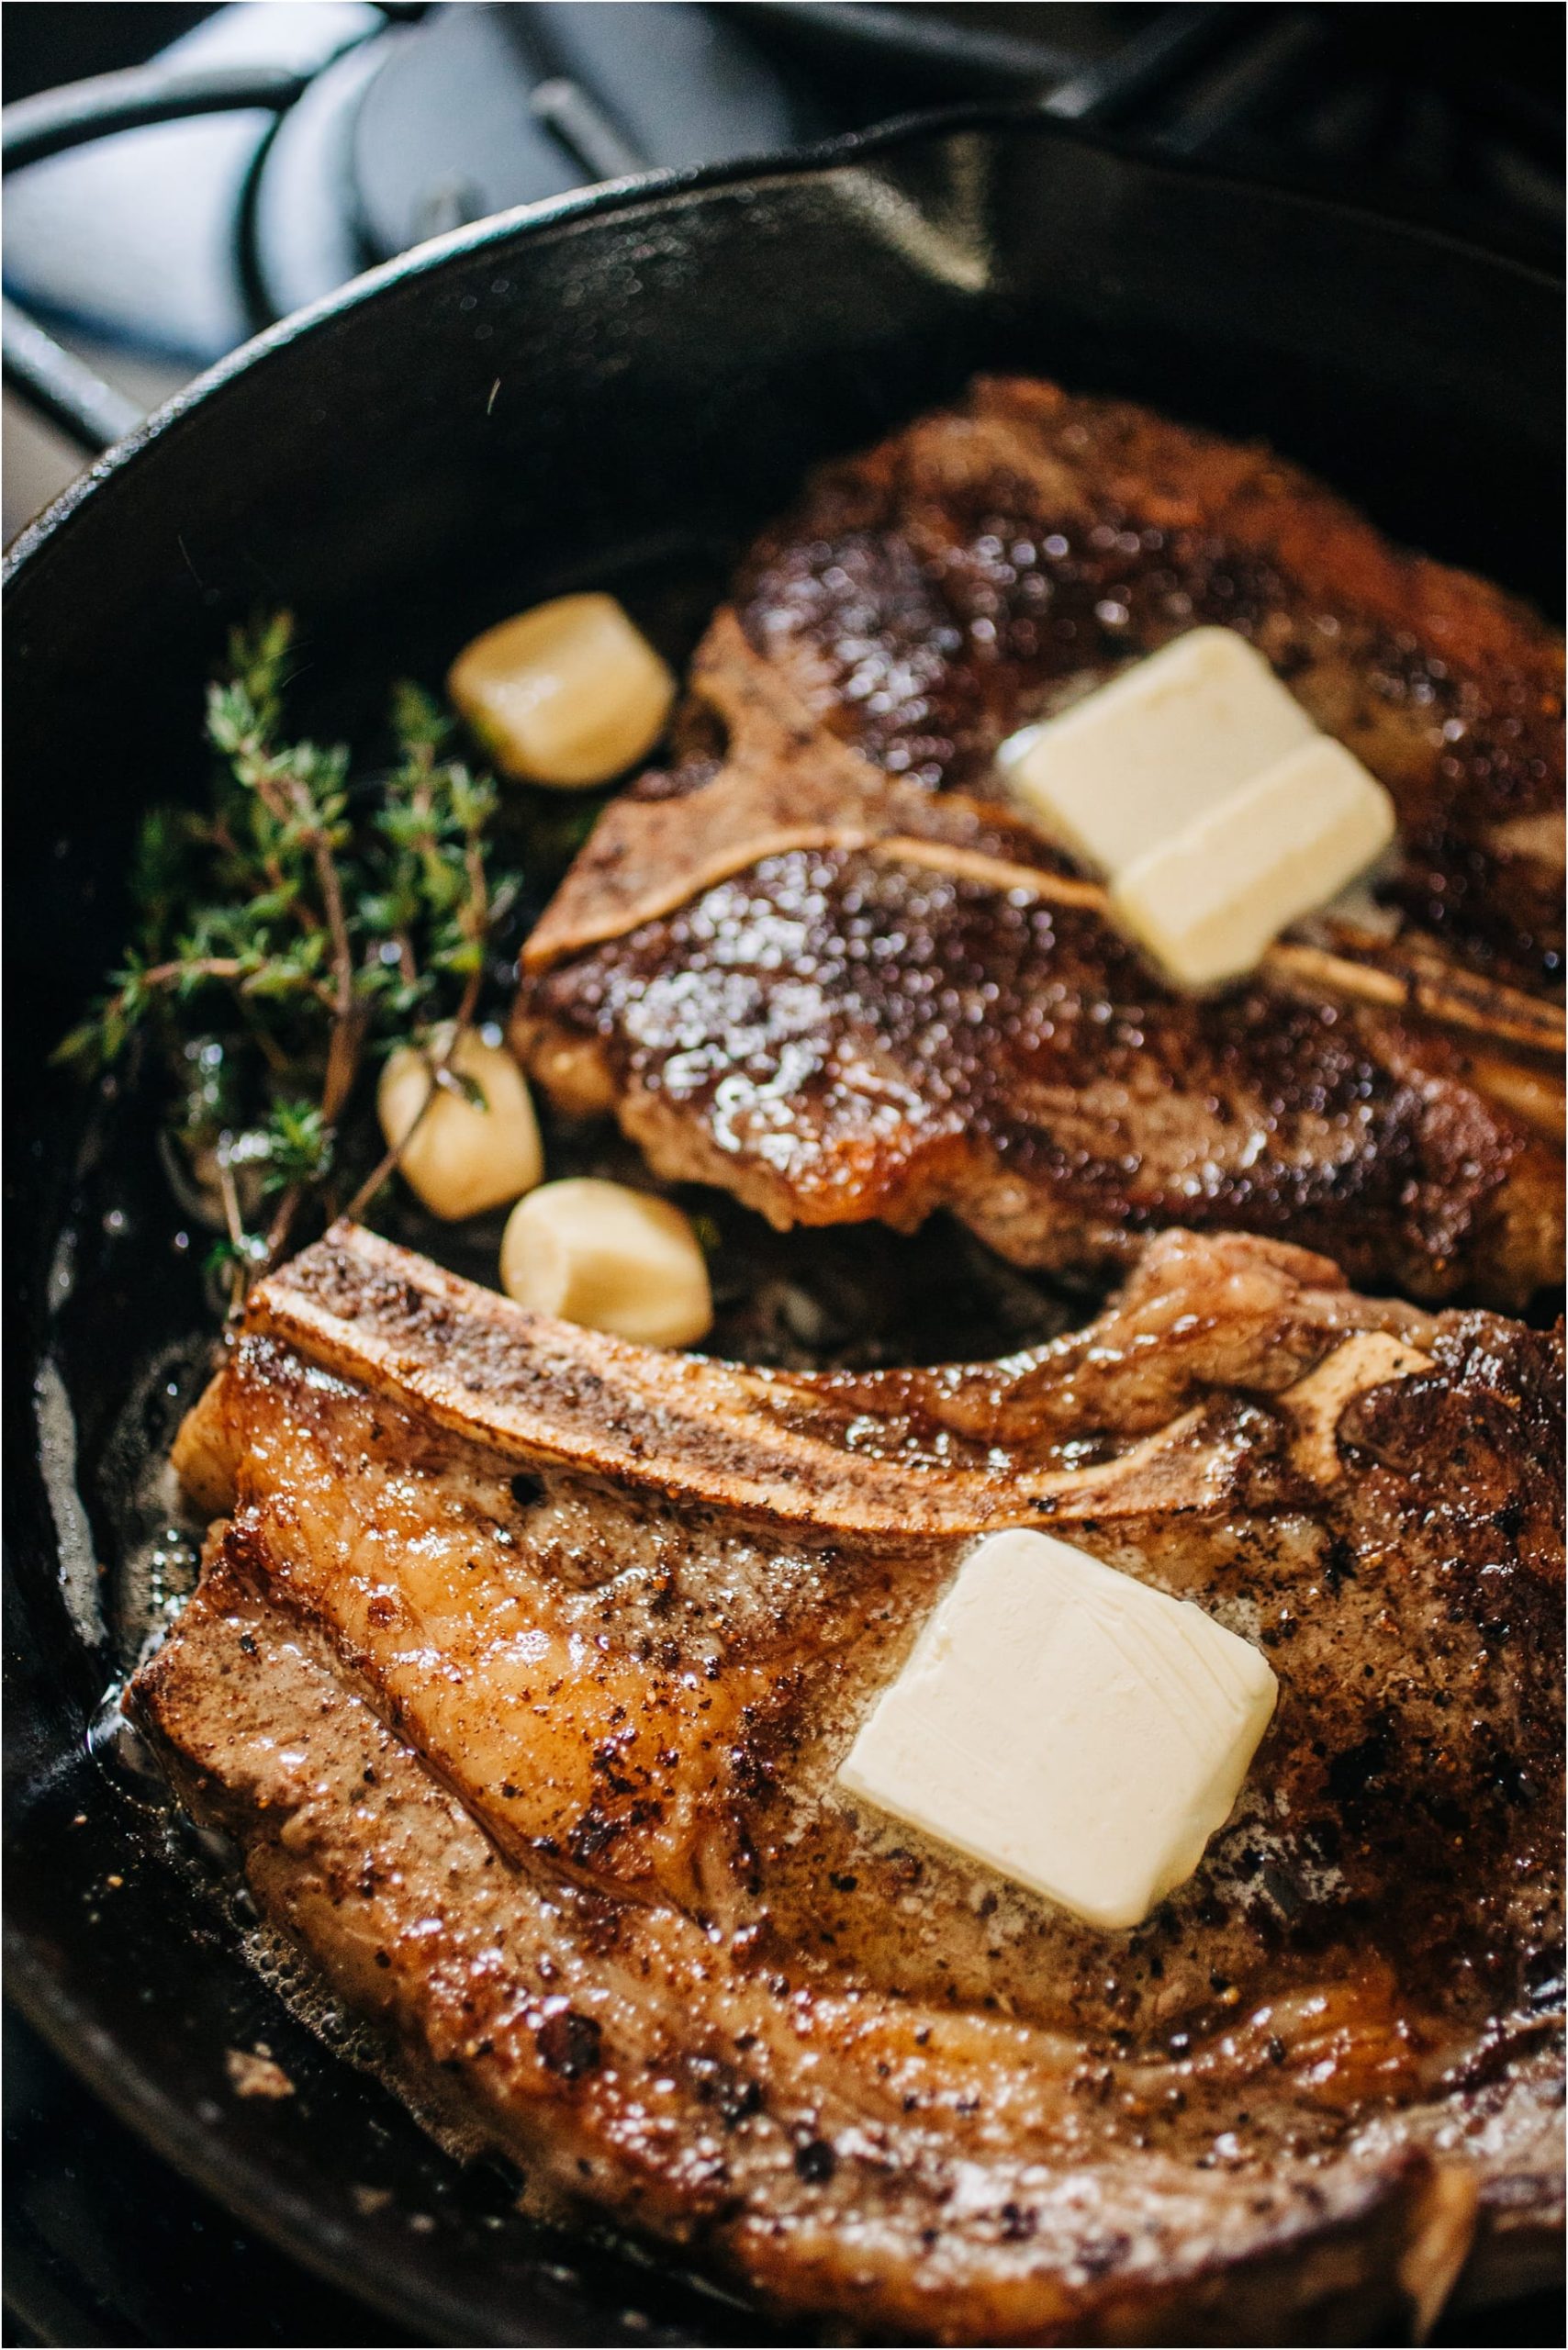 https://www.bigskylittlekitchen.com/wp-content/uploads/2021/04/Shields-Valley-Ranchers-Steaks-and-Ground-Beef-Images-by-Kristine-Paulsen-Photography-for-Big-Sky-Little-Kitchen_0005-scaled.jpg